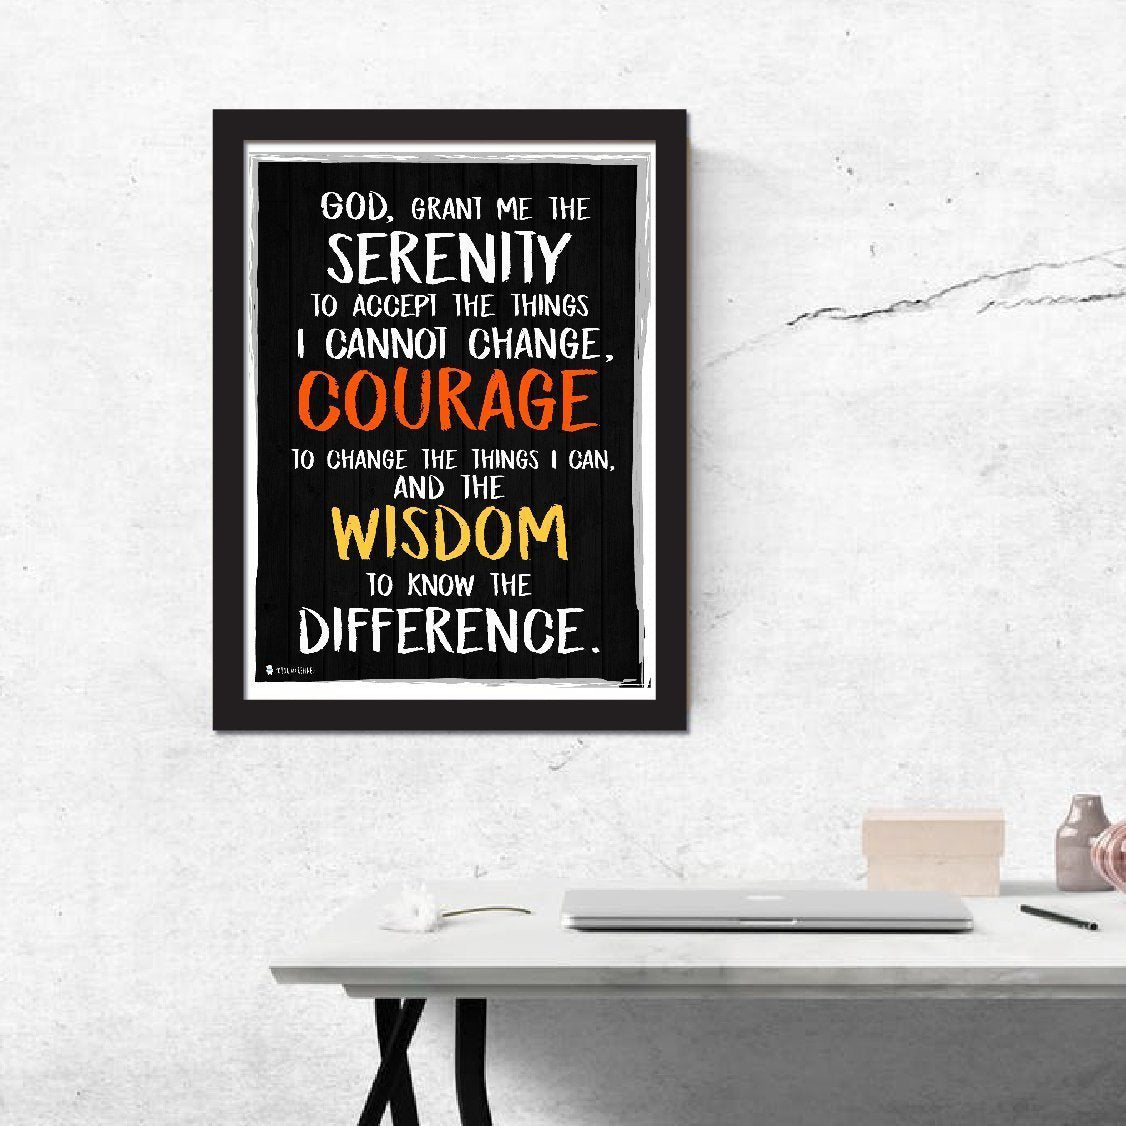 Serenity prayer wall art perfect for decorating kitchens homes bathrooms bedrooms hallways - Young N' Refined